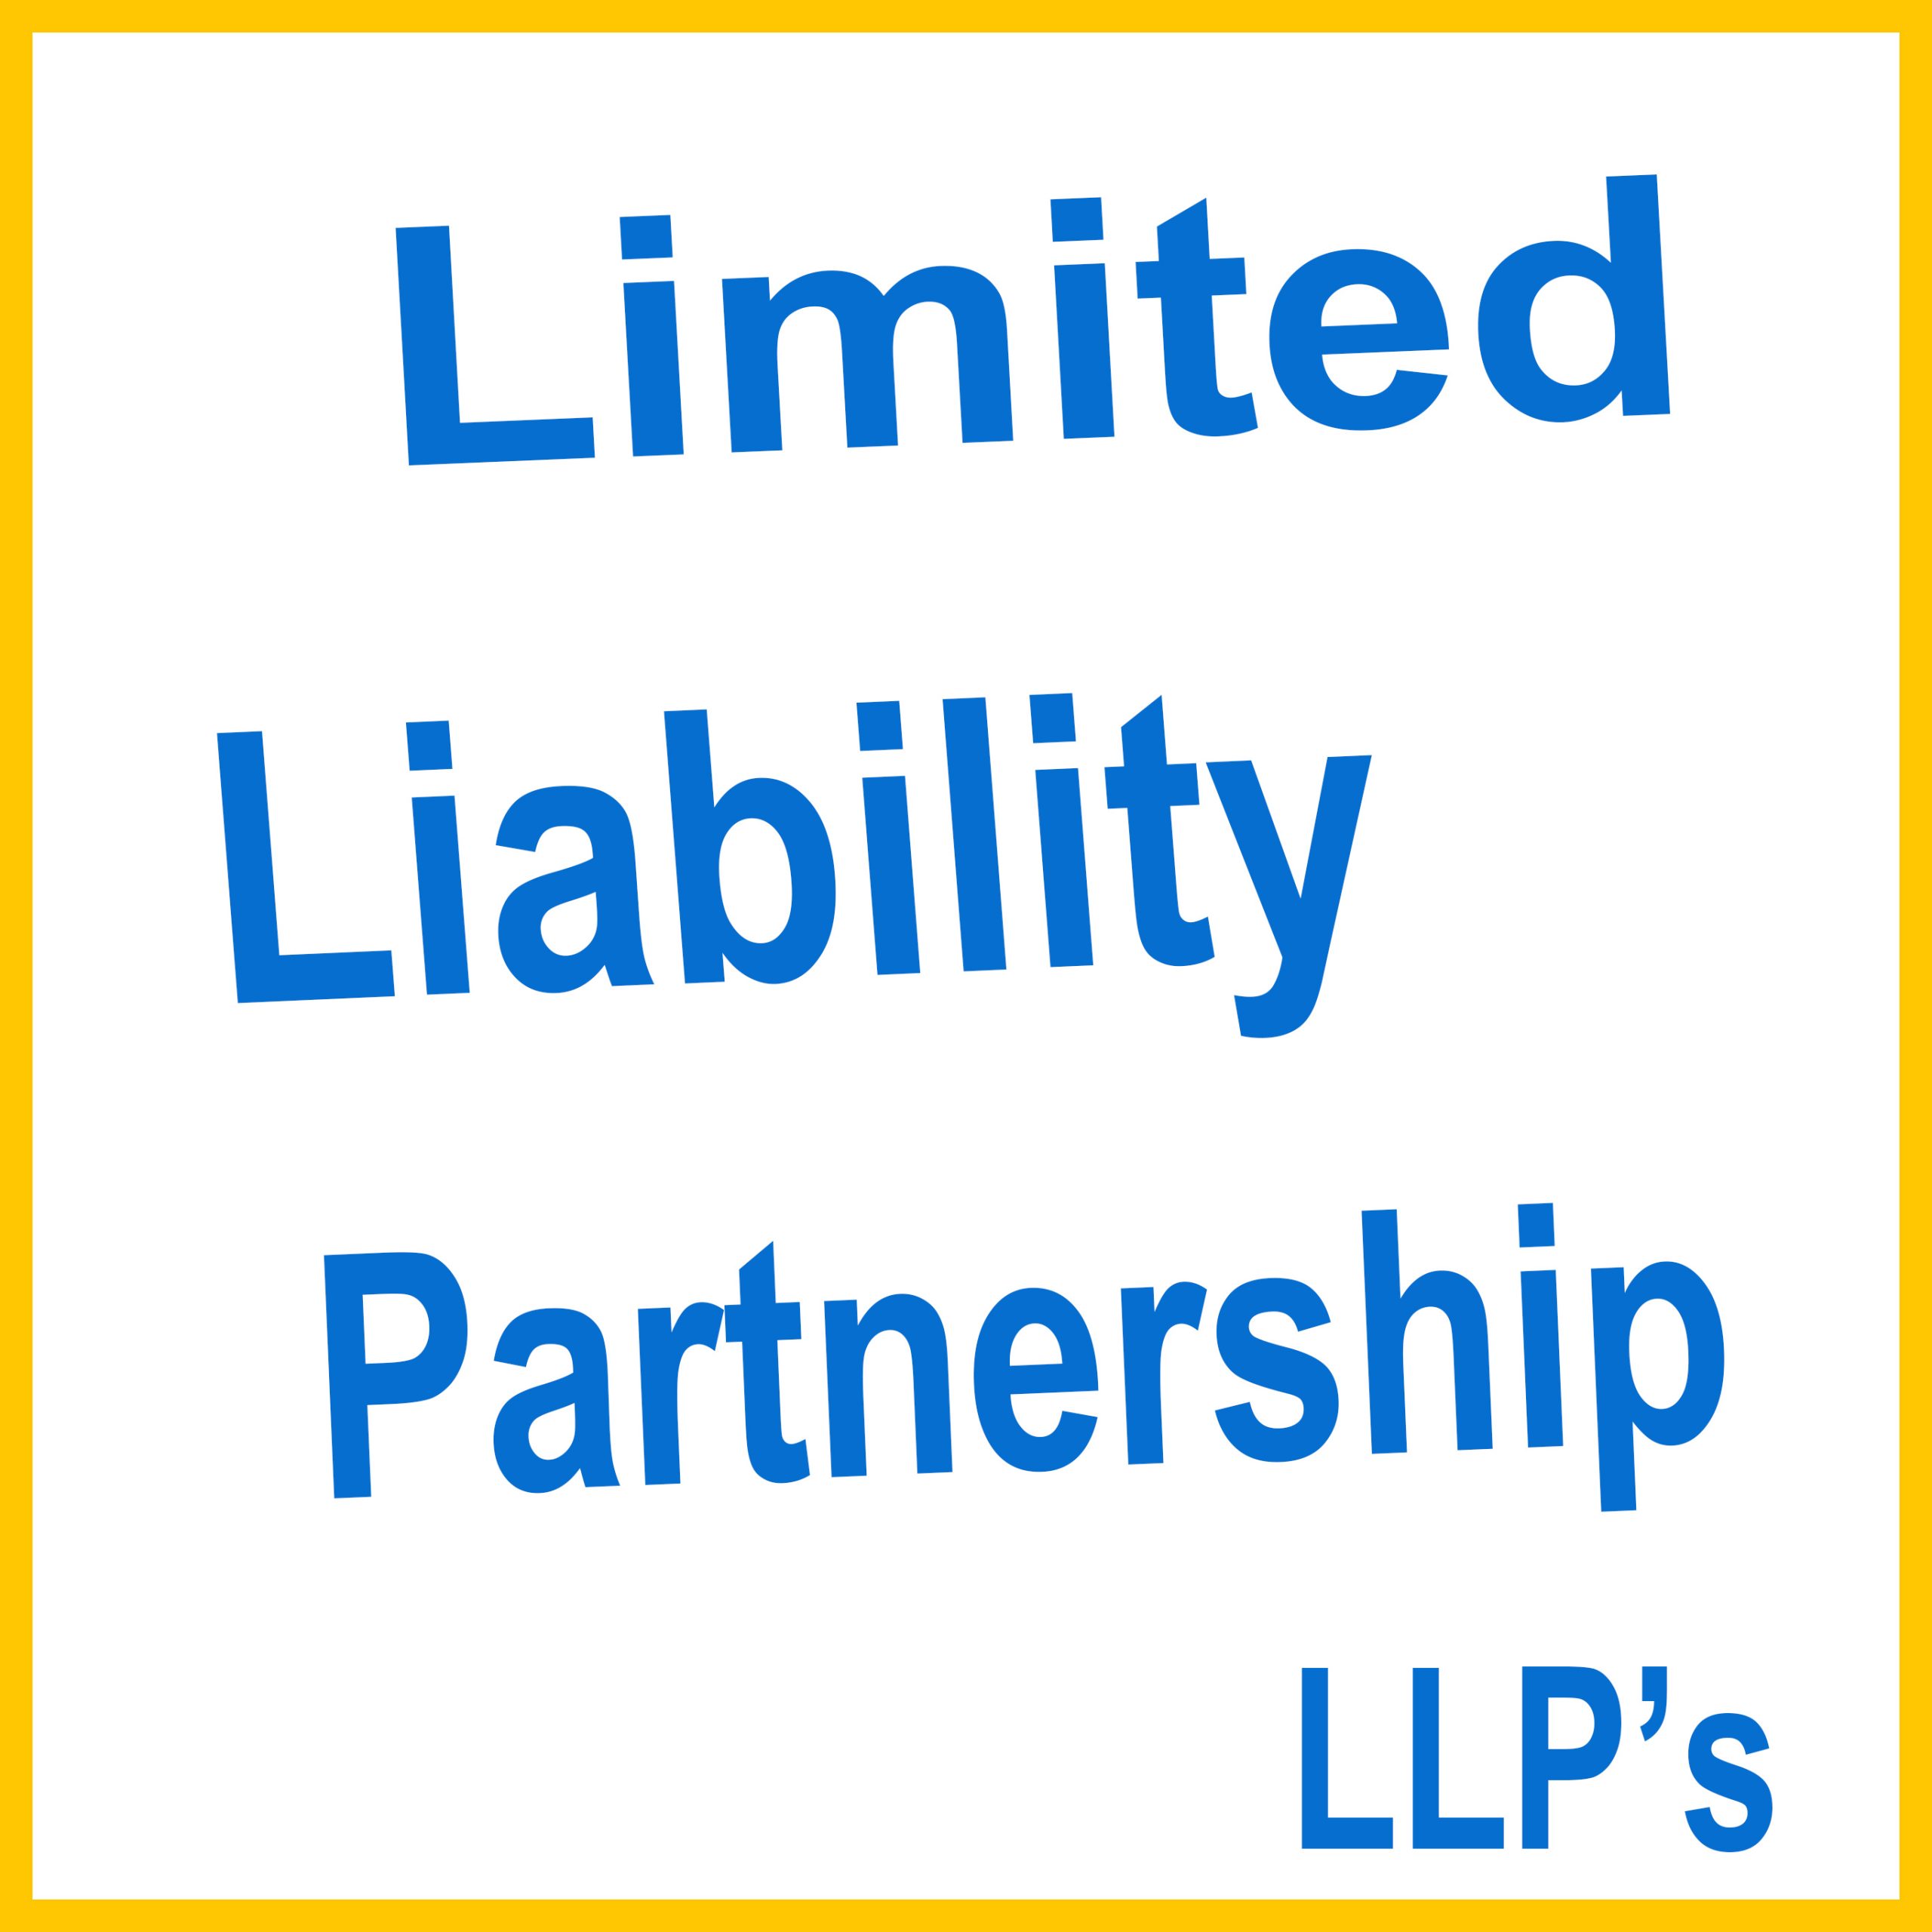 Limited Liability Partnerships – LLP’s